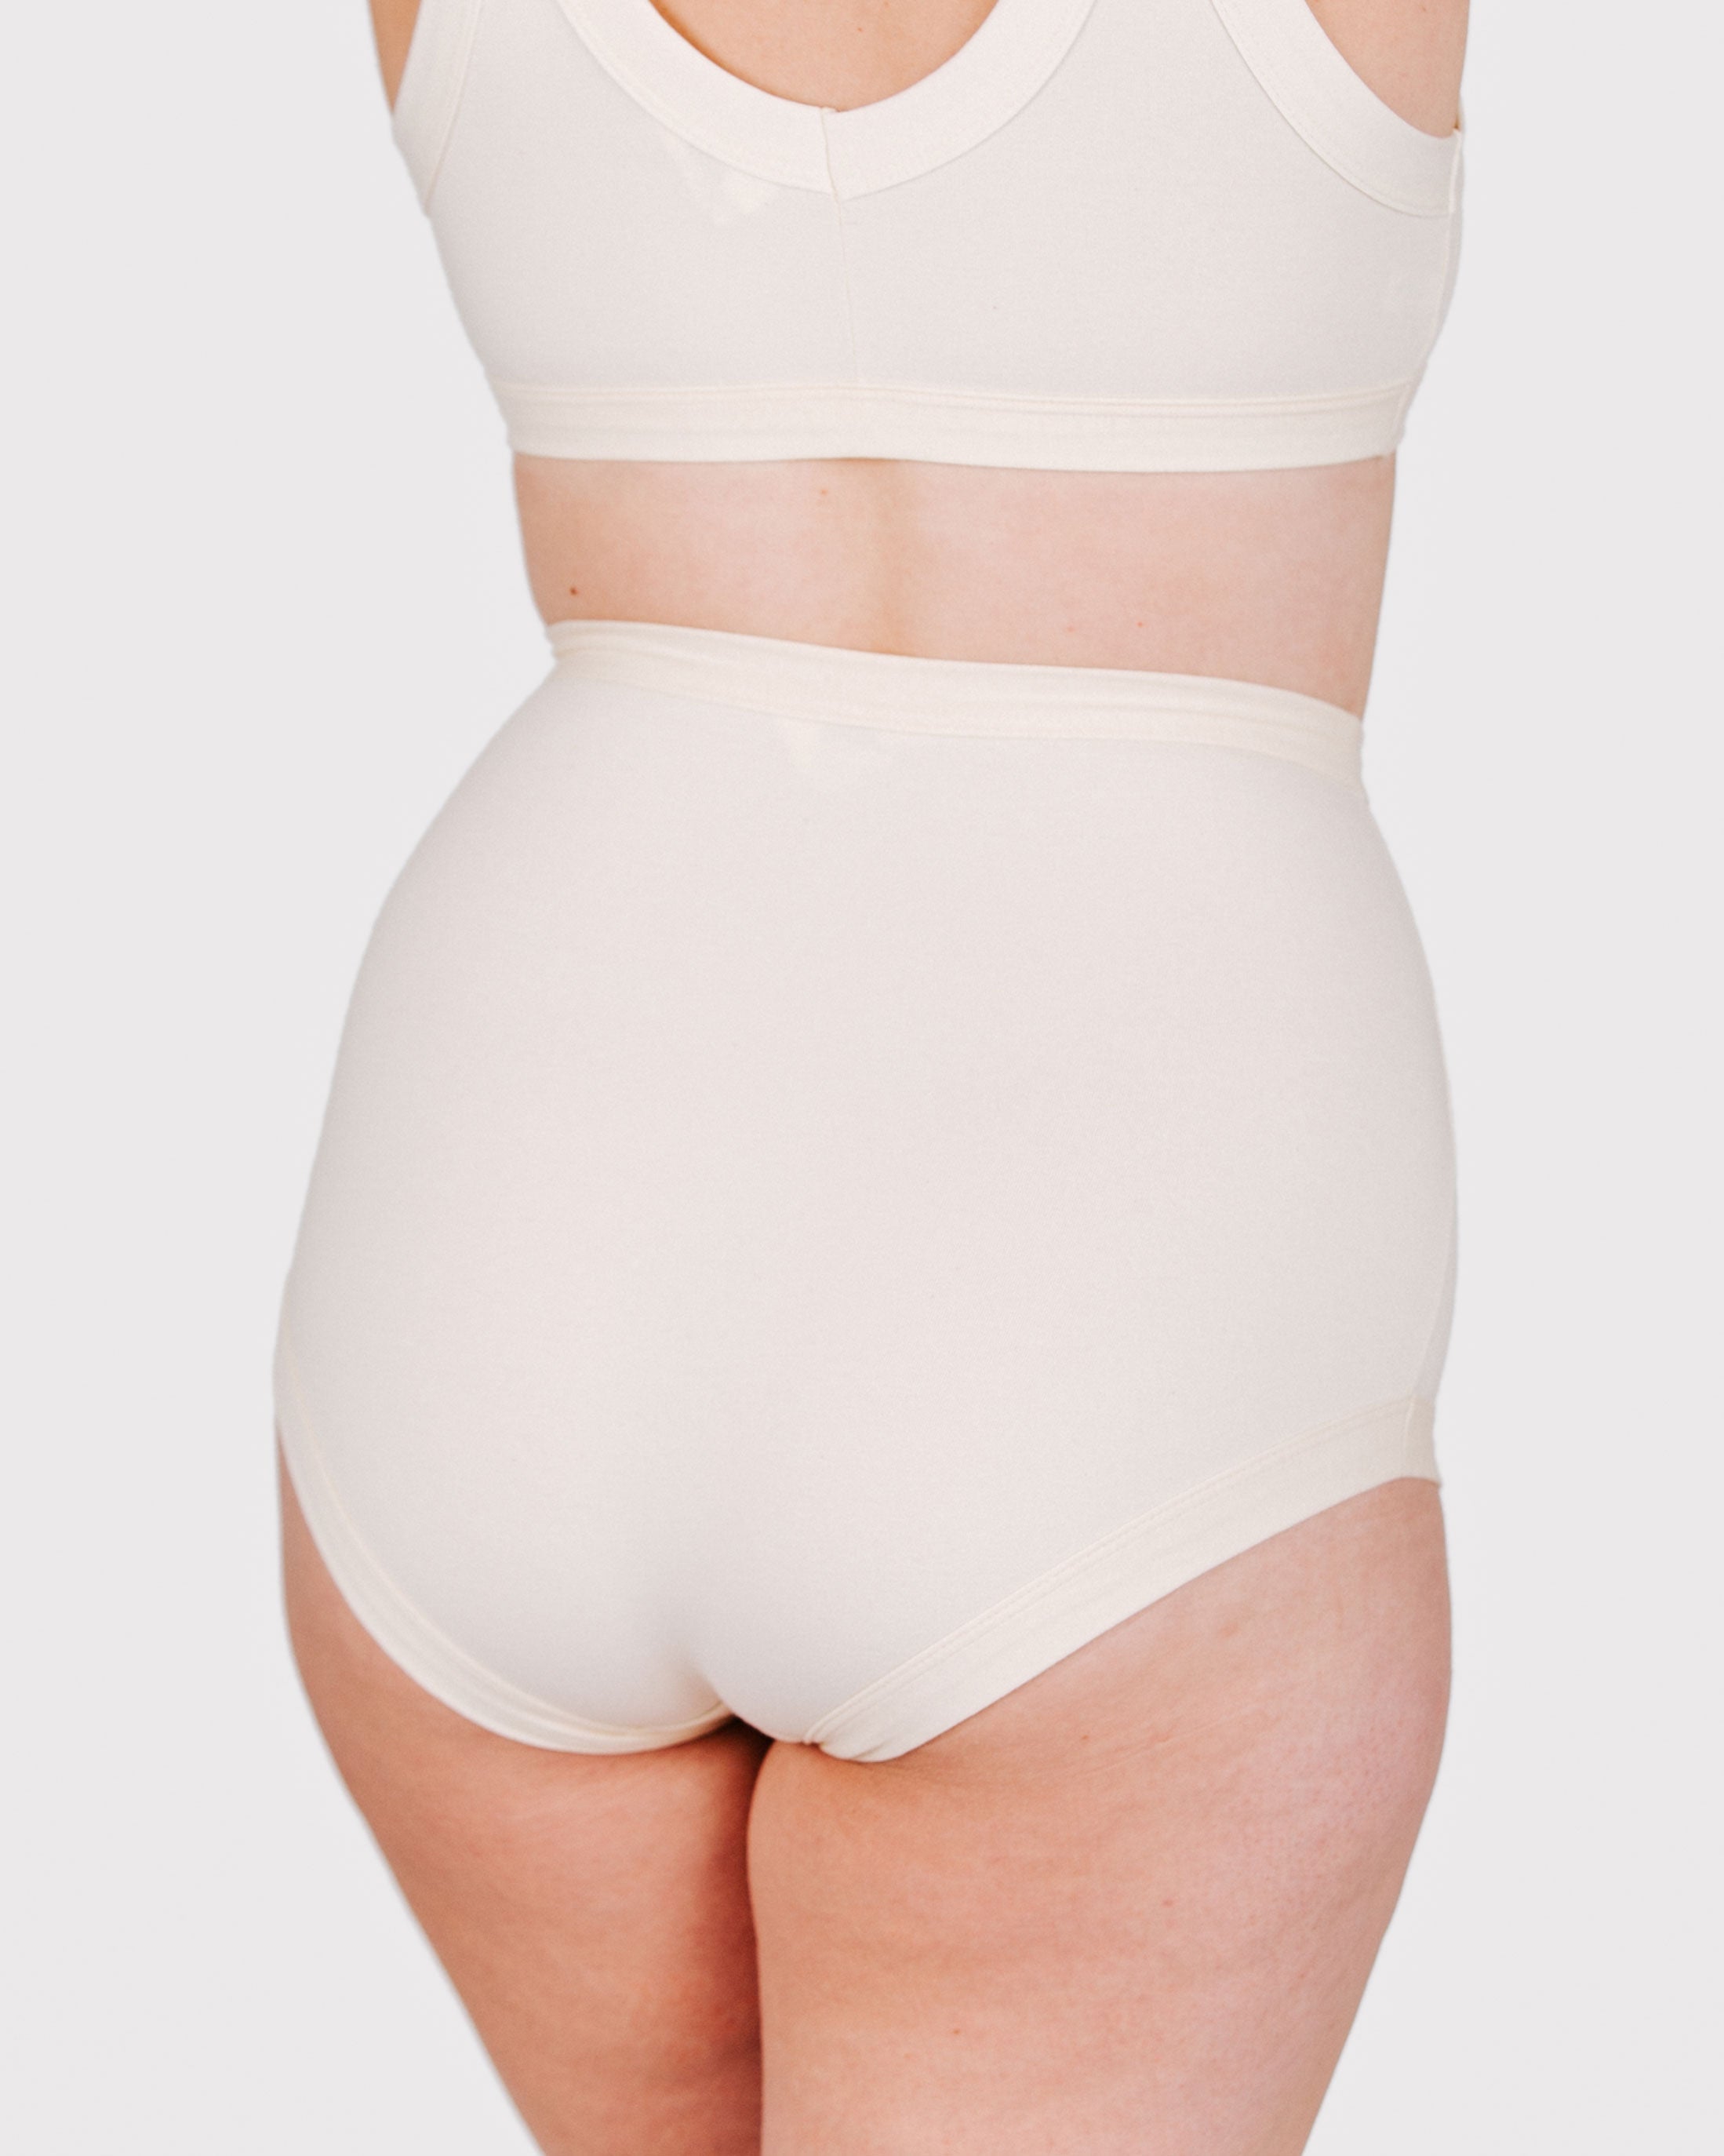 Fit photo from the back of Thunderpants organic cotton Sky Rise style underwear in off-white, showing a wedgie-free bum, on a model.